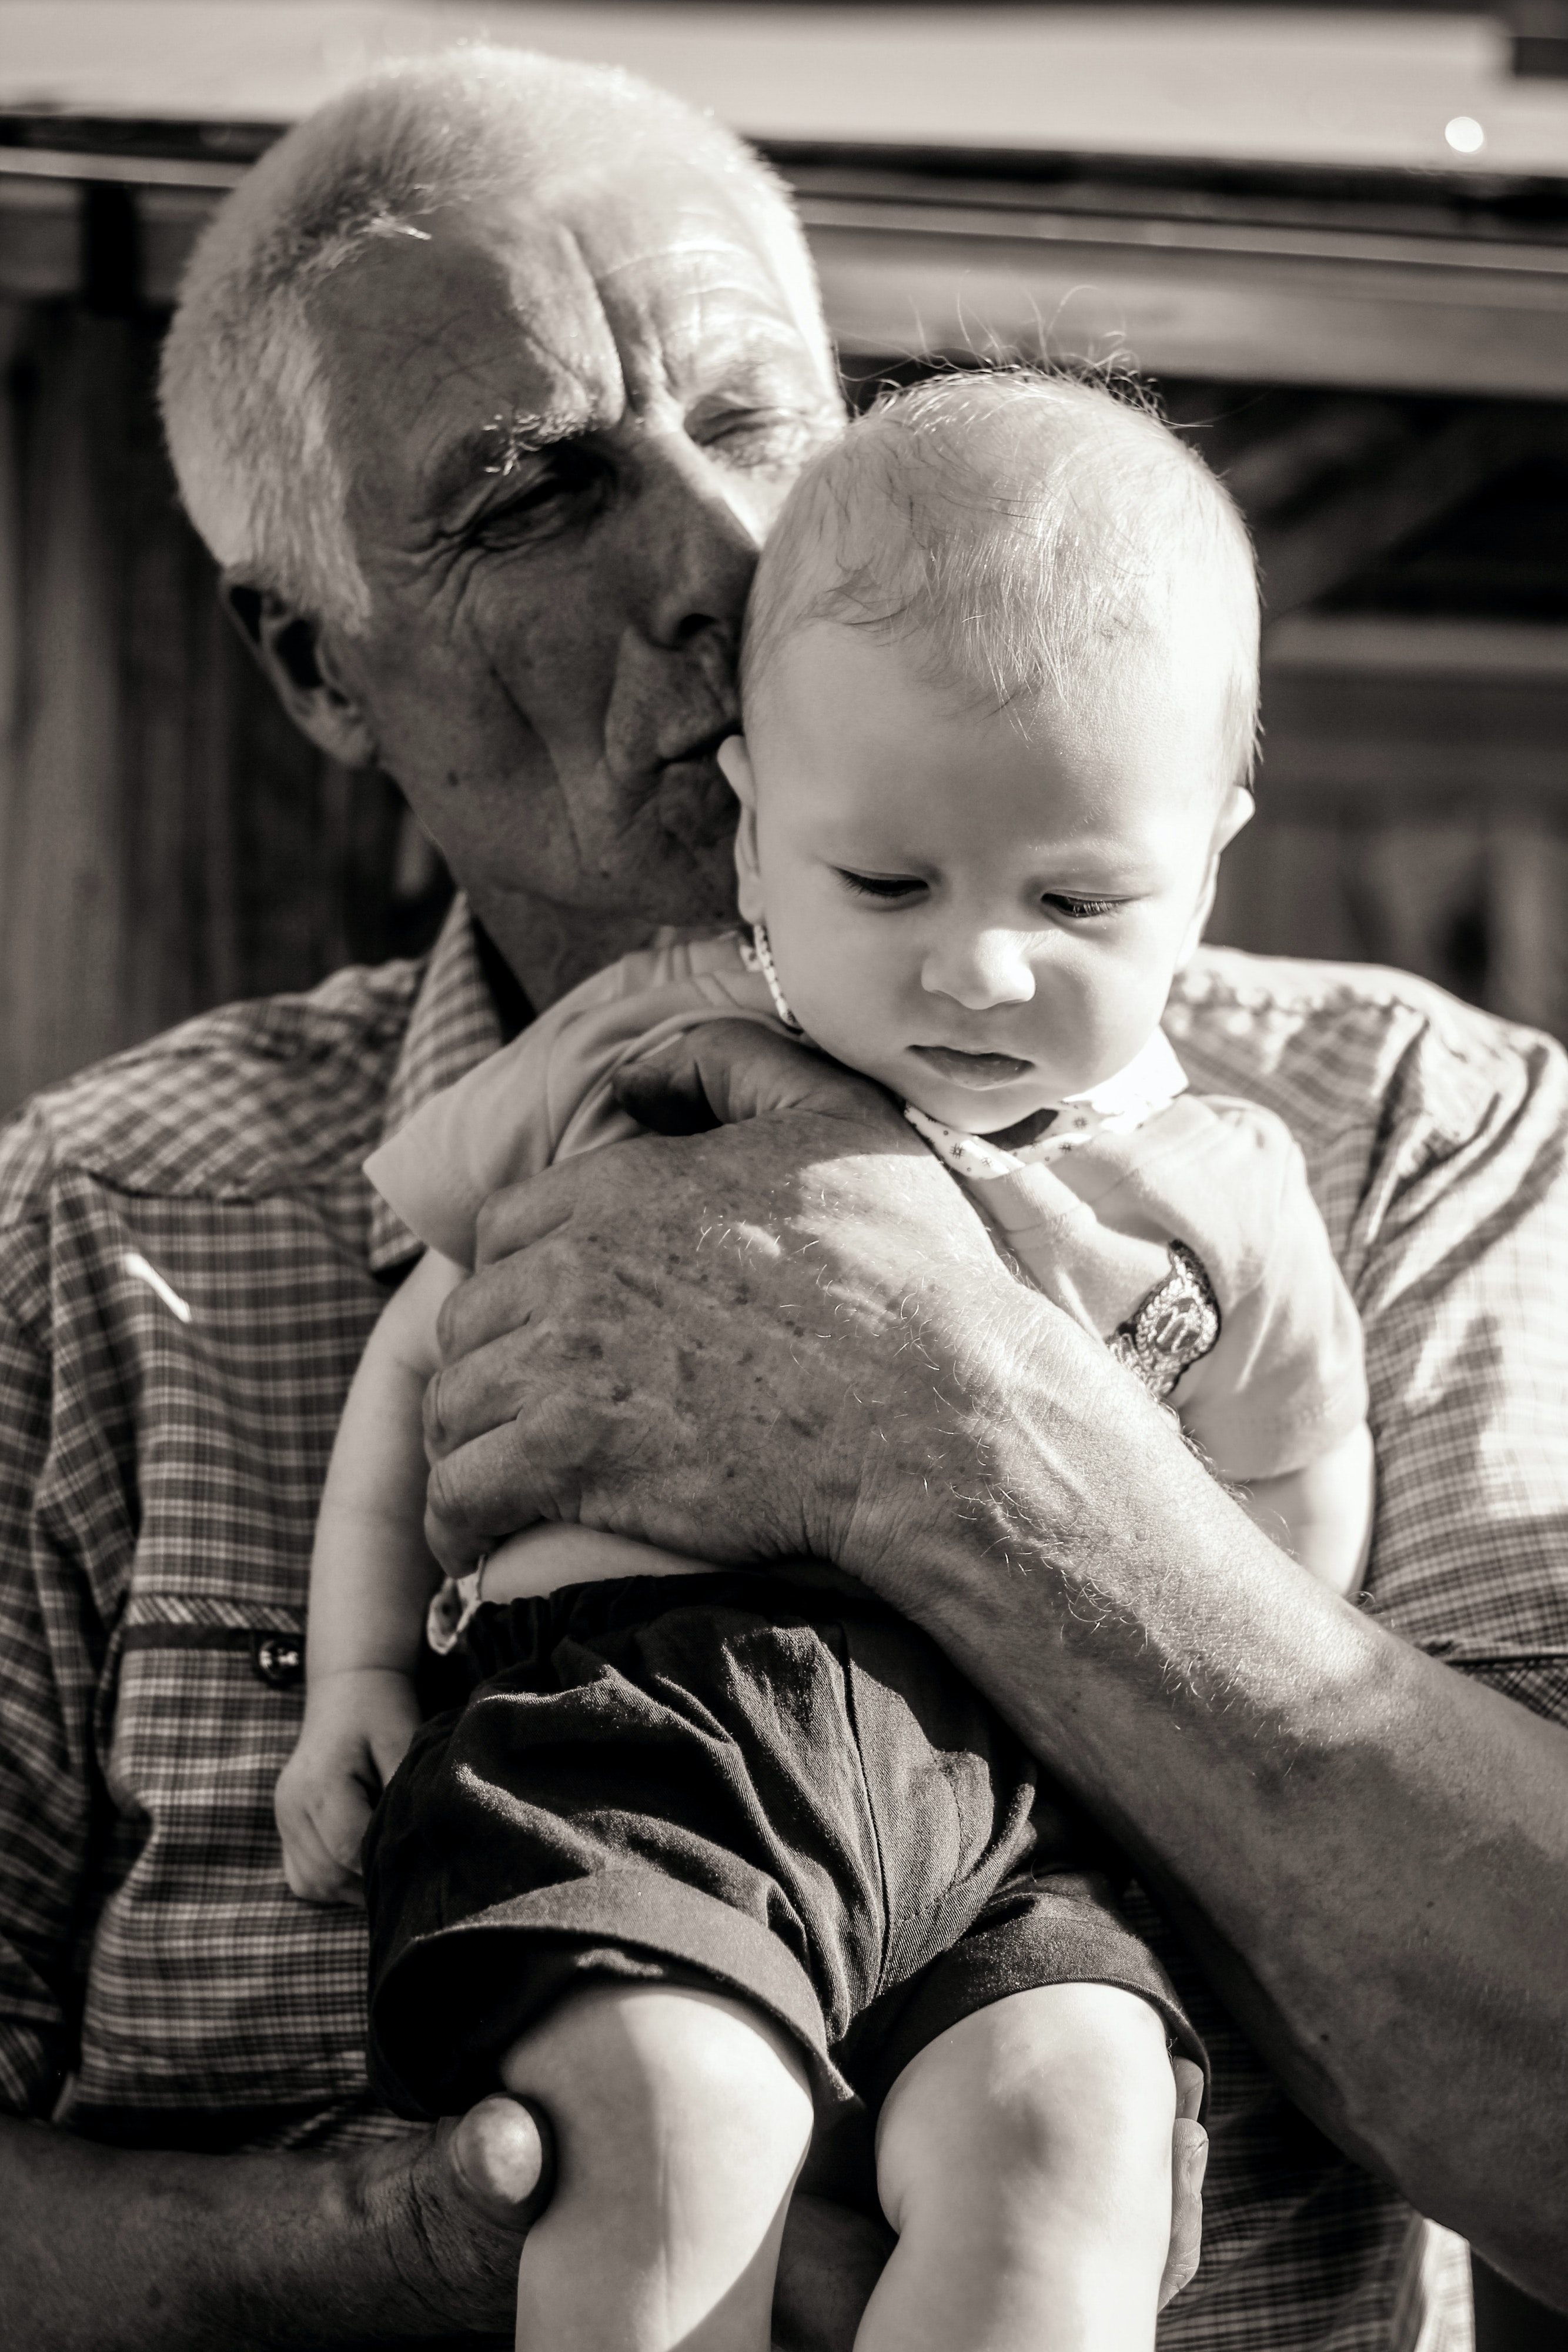 Old man holding a baby | Source: Pexels